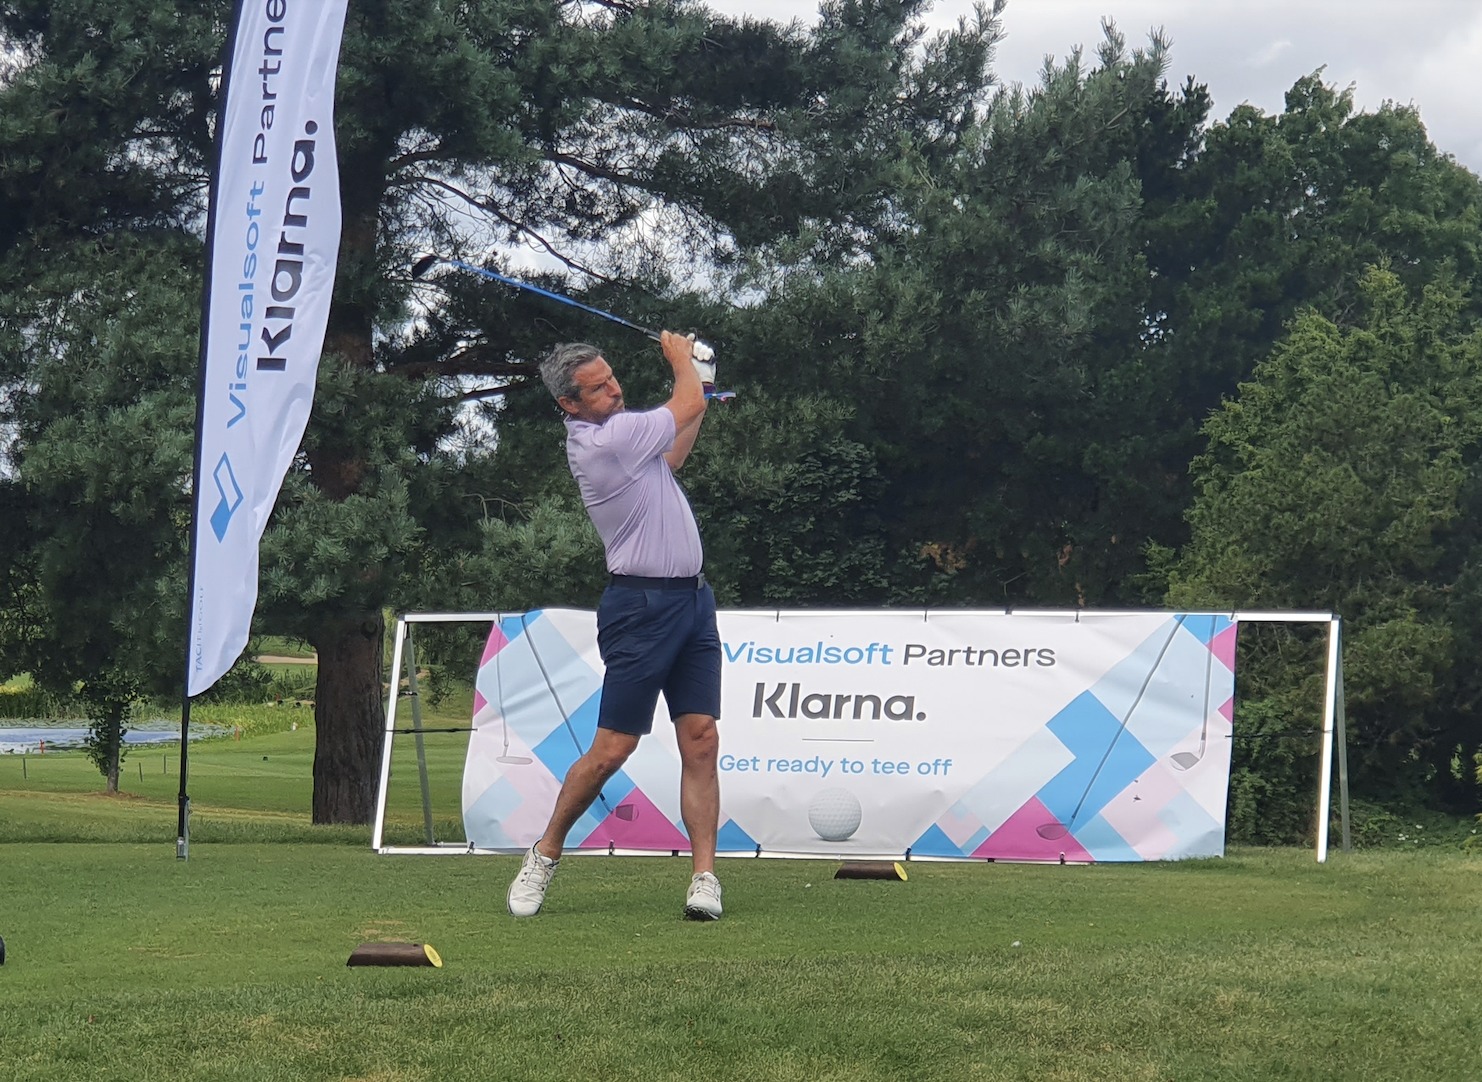 eCommerce specialist Visualsoft held one of the companies most successful charity golf days, raising over £8,000 for the Solan Connor Fawcett Family Cancer Trust.